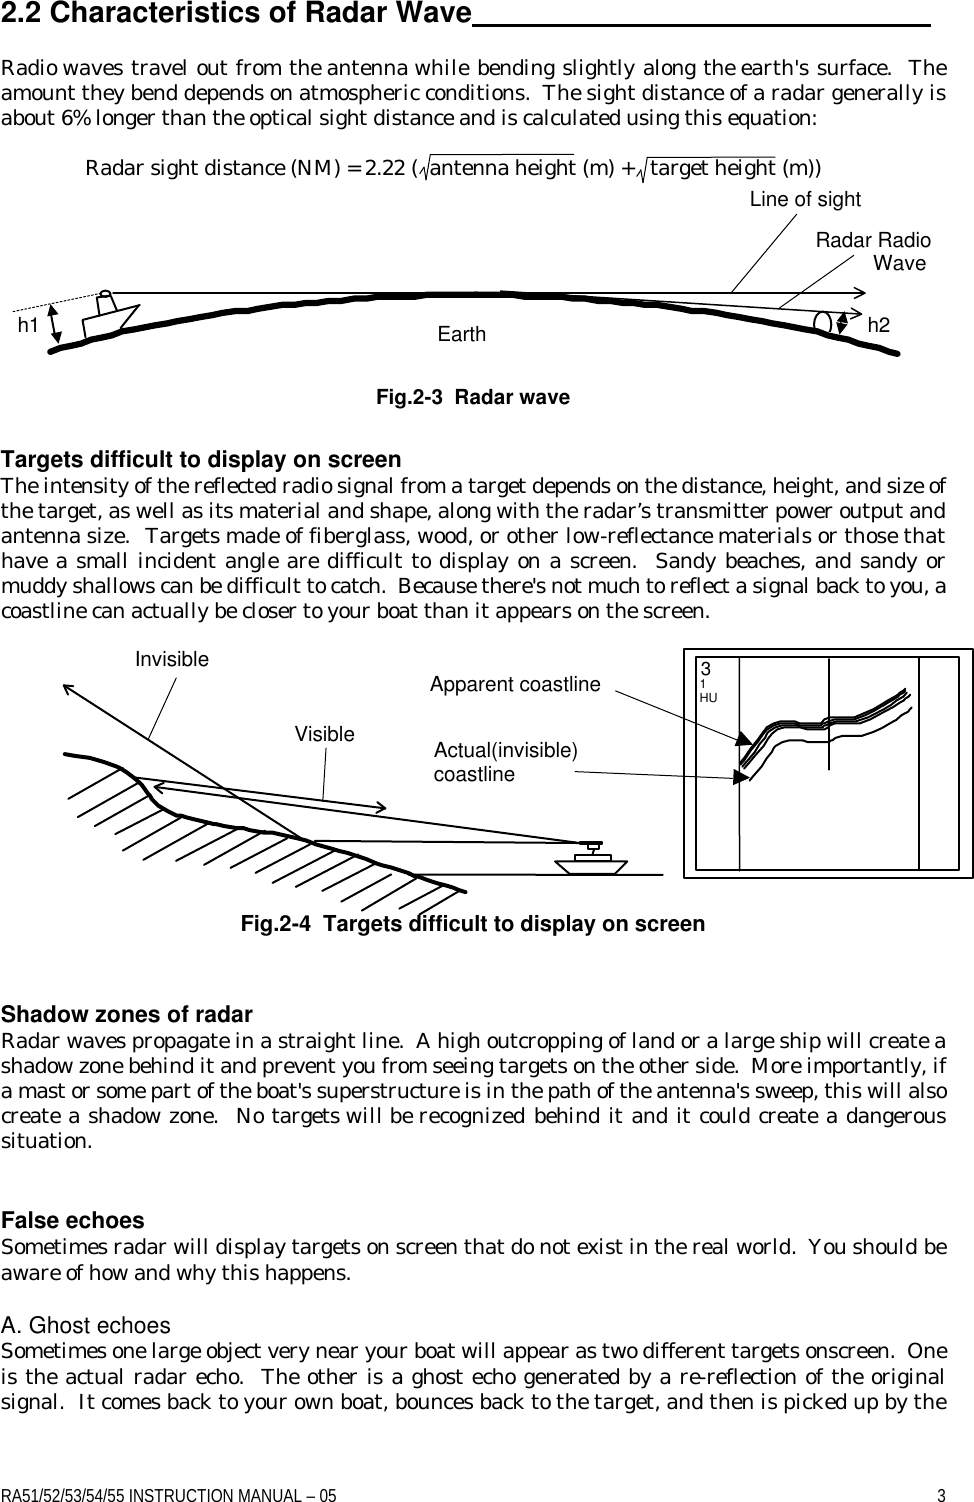 RA51/52/53/54/55 INSTRUCTION MANUAL – 05    3 2.2 Characteristics of Radar Wave   Radio waves travel out from the antenna while bending slightly along the earth&apos;s surface.  The amount they bend depends on atmospheric conditions.  The sight distance of a radar generally is about 6% longer than the optical sight distance and is calculated using this equation:   Radar sight distance (NM) = 2.22 (  antenna height (m) +   target height (m))        Fig.2-3  Radar wave Targets difficult to display on screen  The intensity of the reflected radio signal from a target depends on the distance, height, and size of the target, as well as its material and shape, along with the radar’s transmitter power output and antenna size.  Targets made of fiberglass, wood, or other low-reflectance materials or those that have a small incident angle are difficult to display on a screen.  Sandy beaches, and sandy or muddy shallows can be difficult to catch.  Because there&apos;s not much to reflect a signal back to you, a coastline can actually be closer to your boat than it appears on the screen.           Fig.2-4  Targets difficult to display on screen  Shadow zones of radar Radar waves propagate in a straight line.  A high outcropping of land or a large ship will create a shadow zone behind it and prevent you from seeing targets on the other side.  More importantly, if a mast or some part of the boat&apos;s superstructure is in the path of the antenna&apos;s sweep, this will also create a shadow zone.  No targets will be recognized behind it and it could create a dangerous situation.   False echoes Sometimes radar will display targets on screen that do not exist in the real world.  You should be aware of how and why this happens.  A. Ghost echoes Sometimes one large object very near your boat will appear as two different targets onscreen.  One is the actual radar echo.  The other is a ghost echo generated by a re-reflection of the original signal.  It comes back to your own boat, bounces back to the target, and then is picked up by the h1 h2 Line of sight Radar Radio           Wave Earth Apparent coastline Actual(invisible) coastline Invisible Visible 3 1  HU 